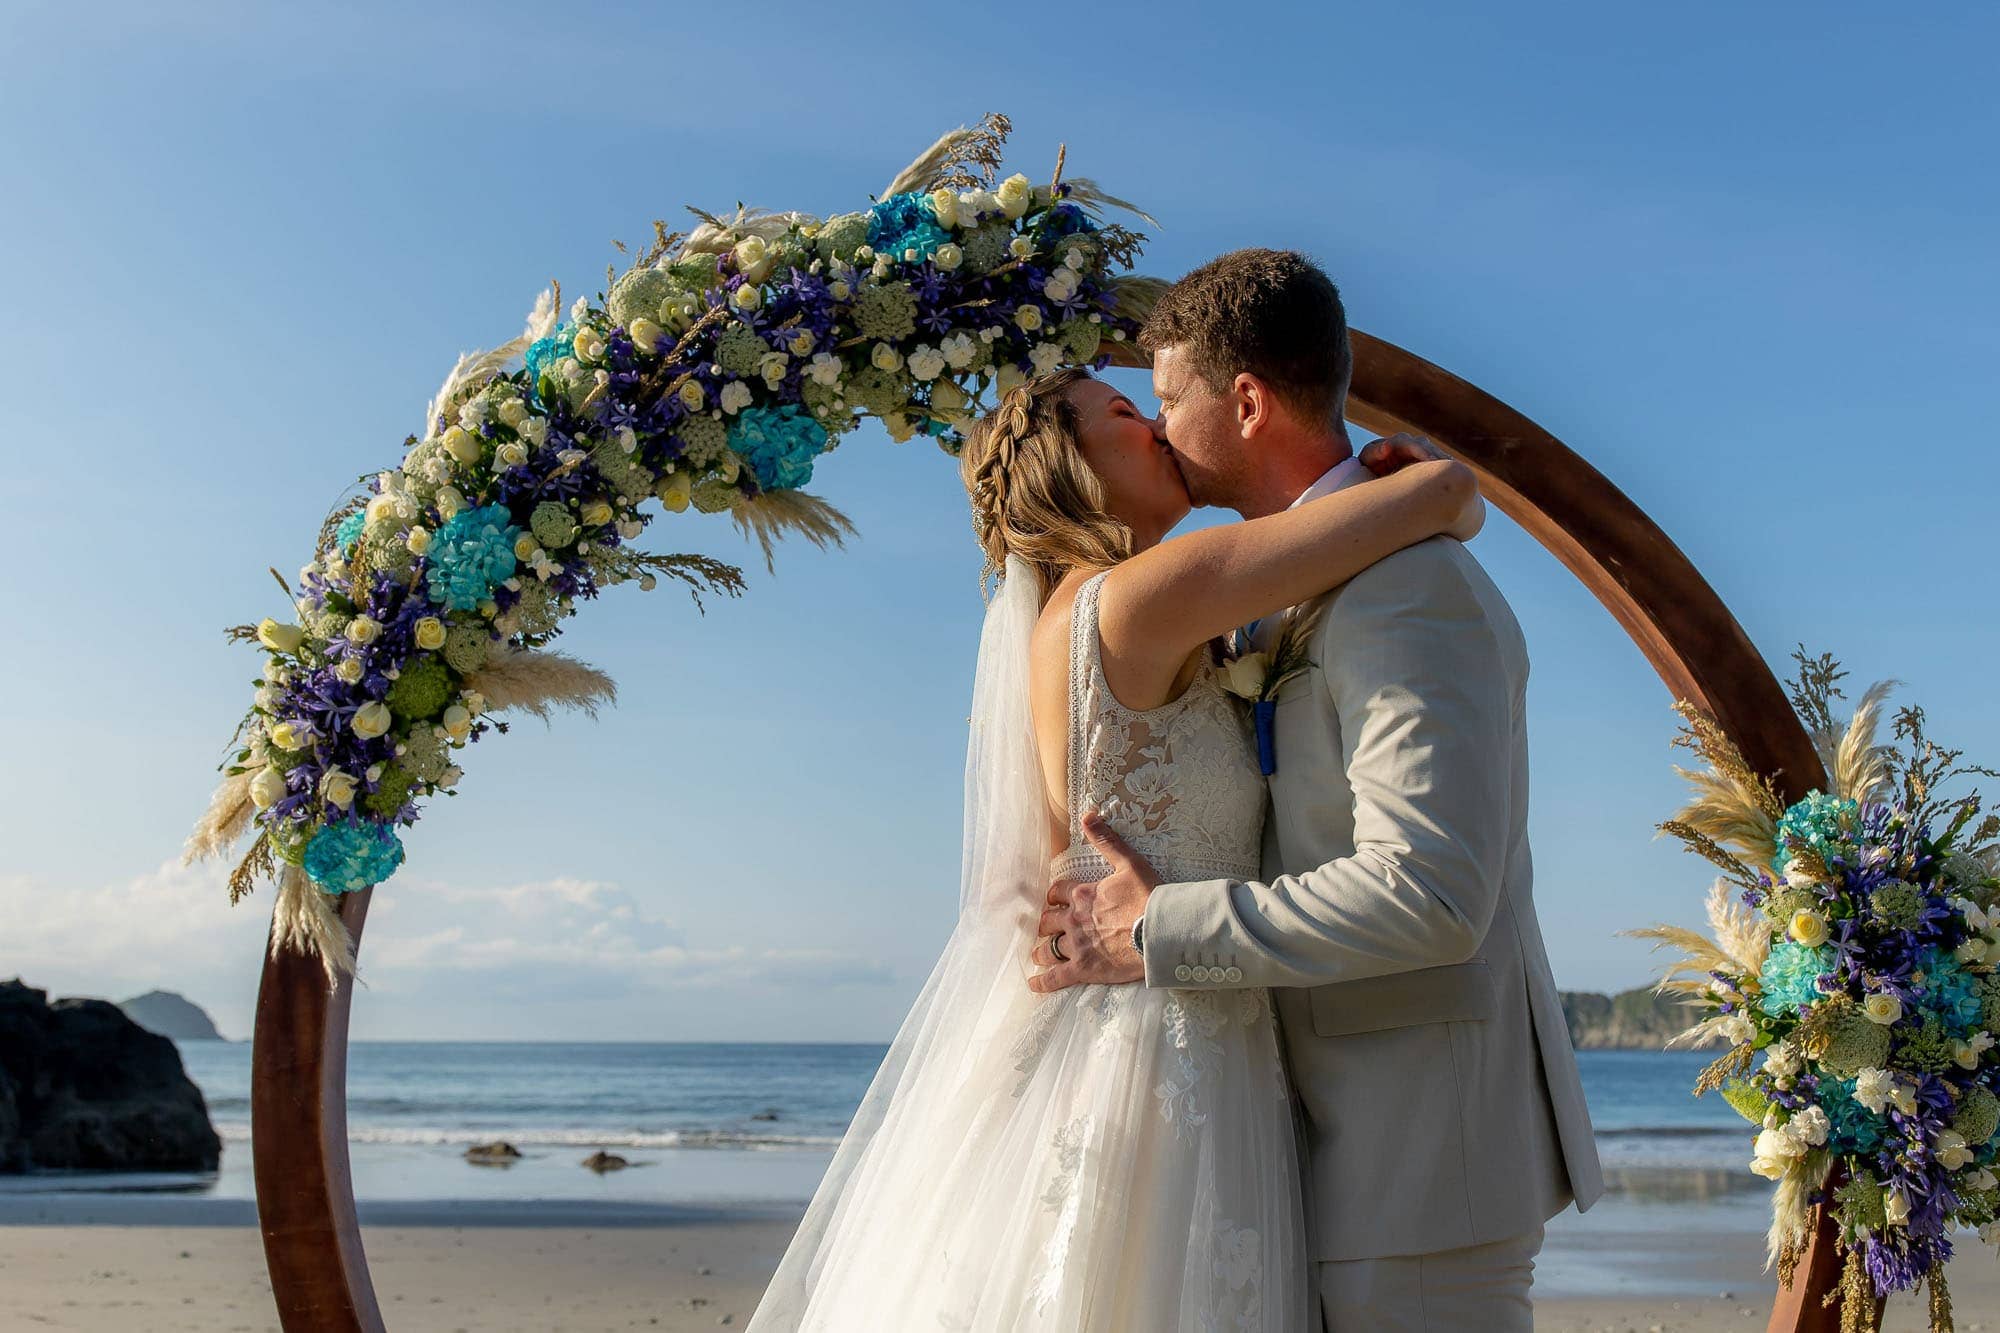 Bride and groom kissing on the beach in front of a circular arbor